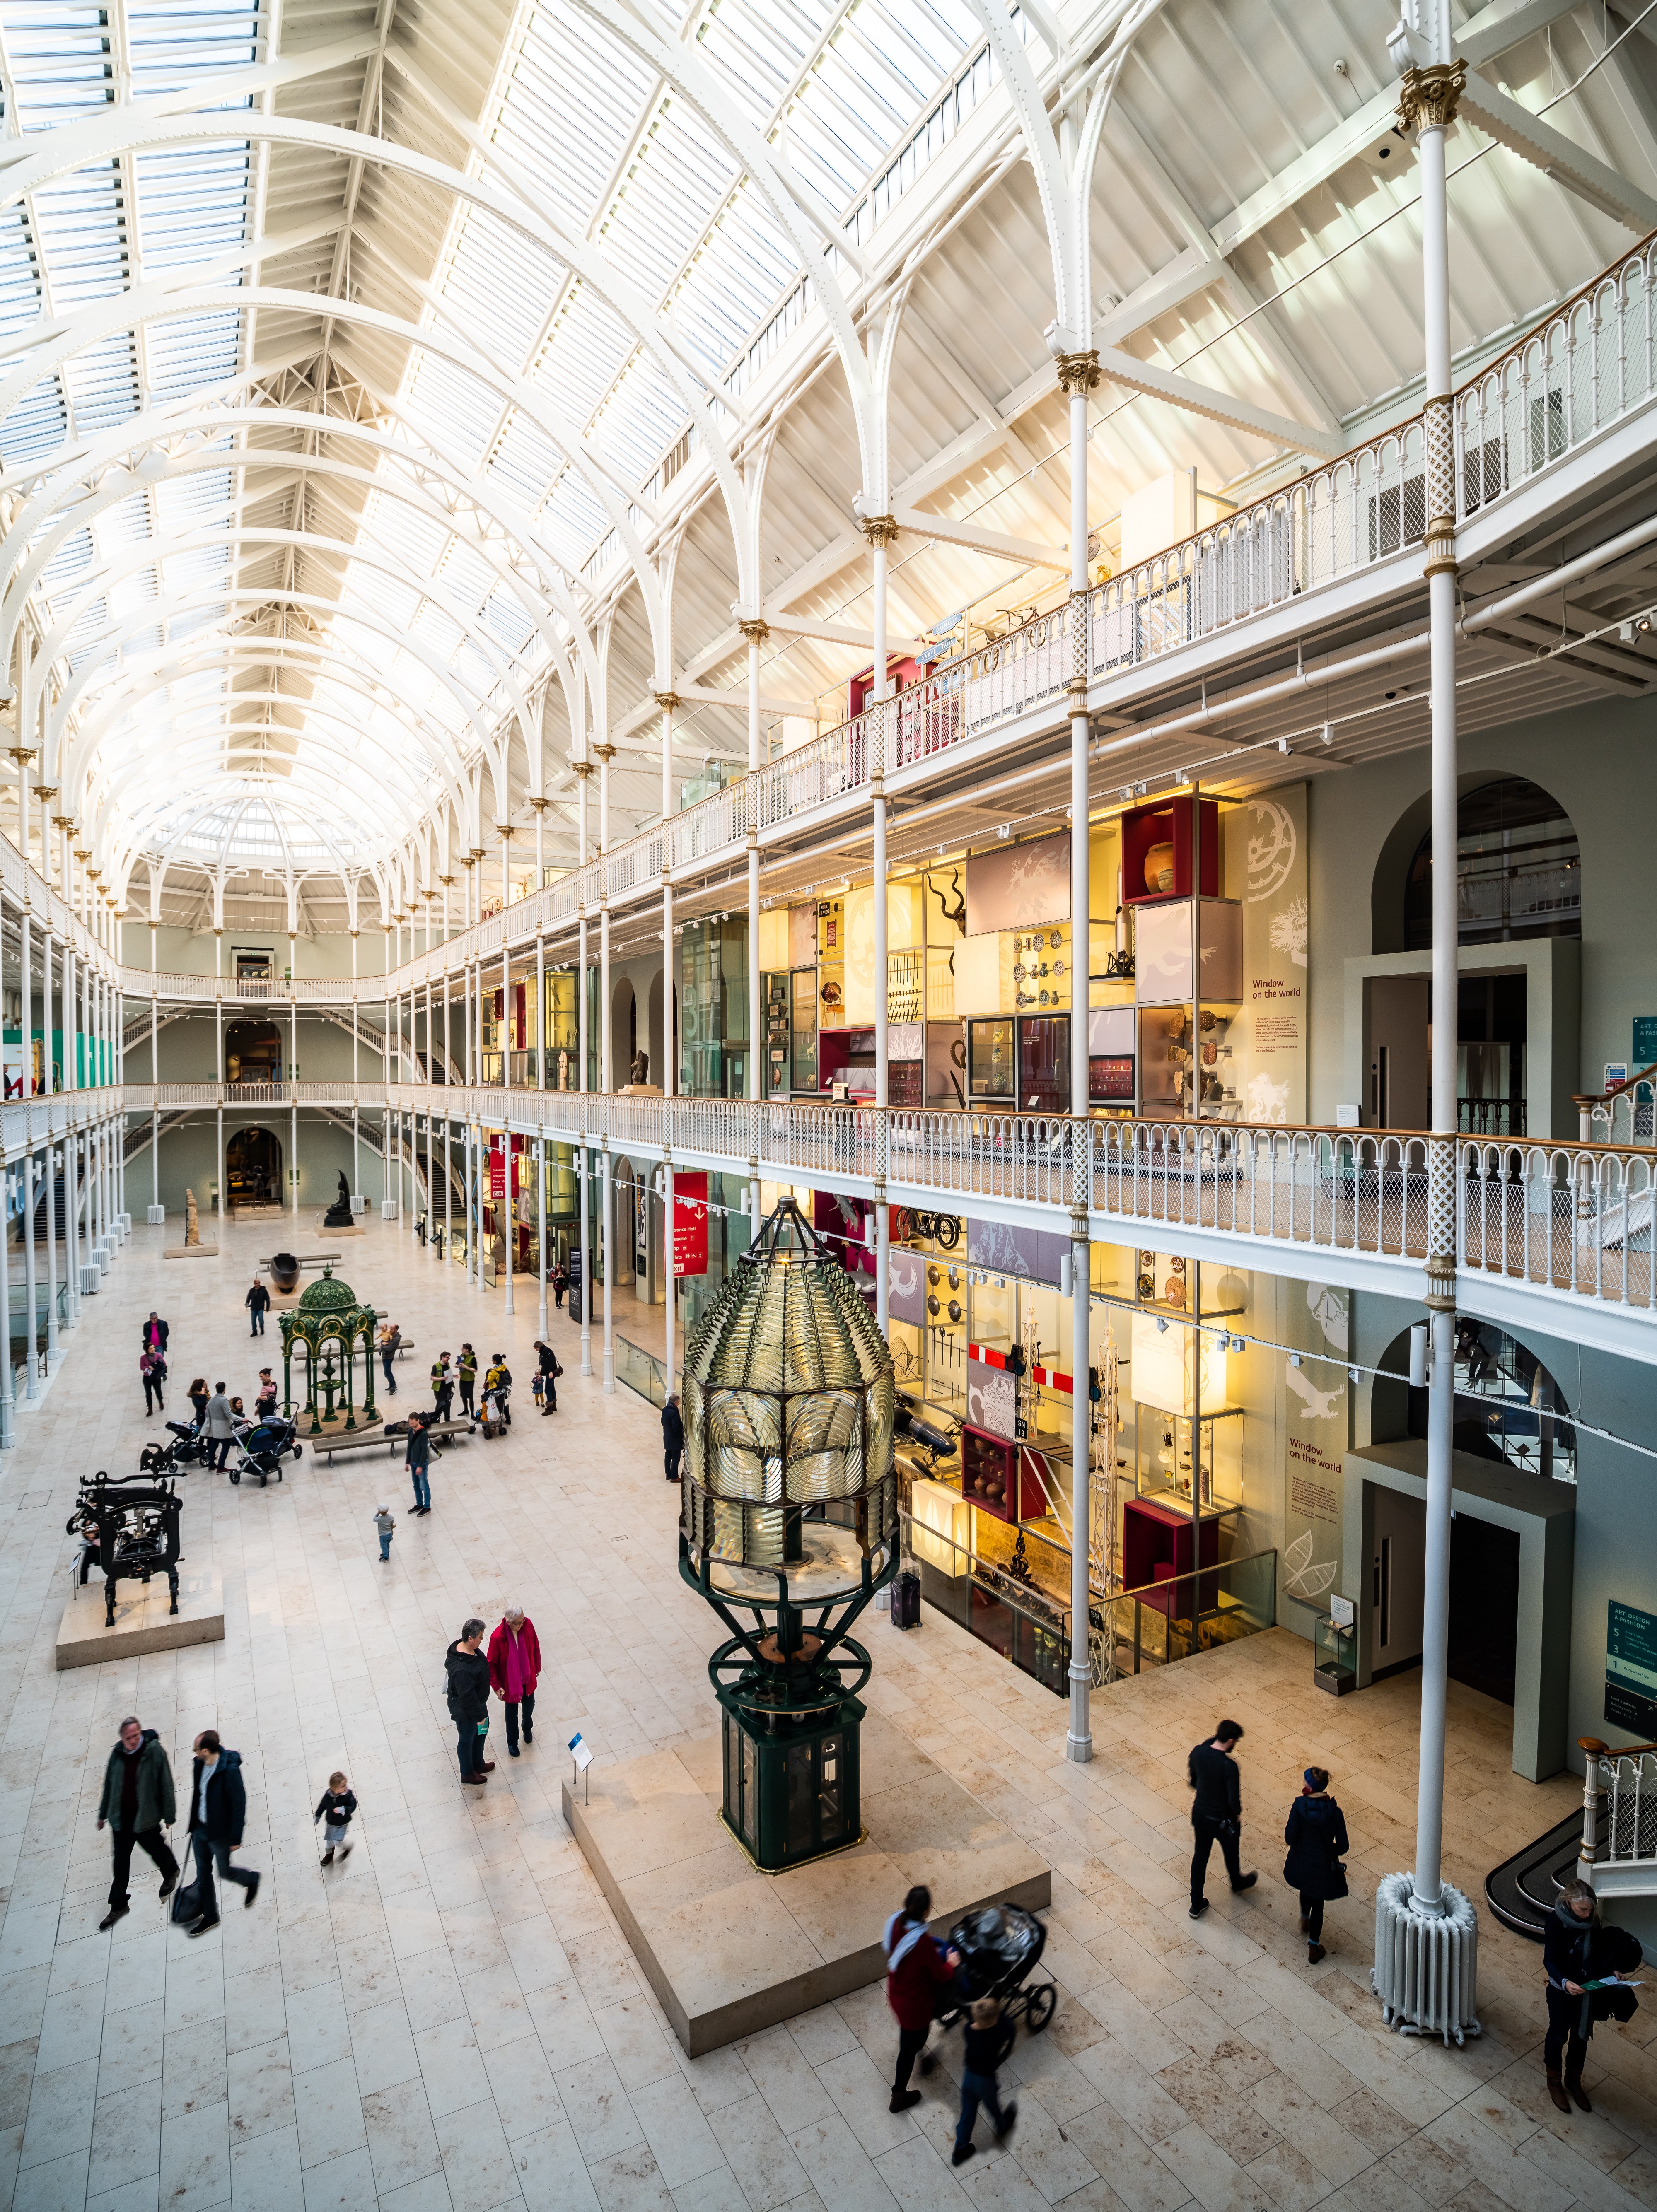 Visitors walk through the Grand Gallery on a sunny day at the National Museum of Scotland, exploring objects within the Window on the World gallery.